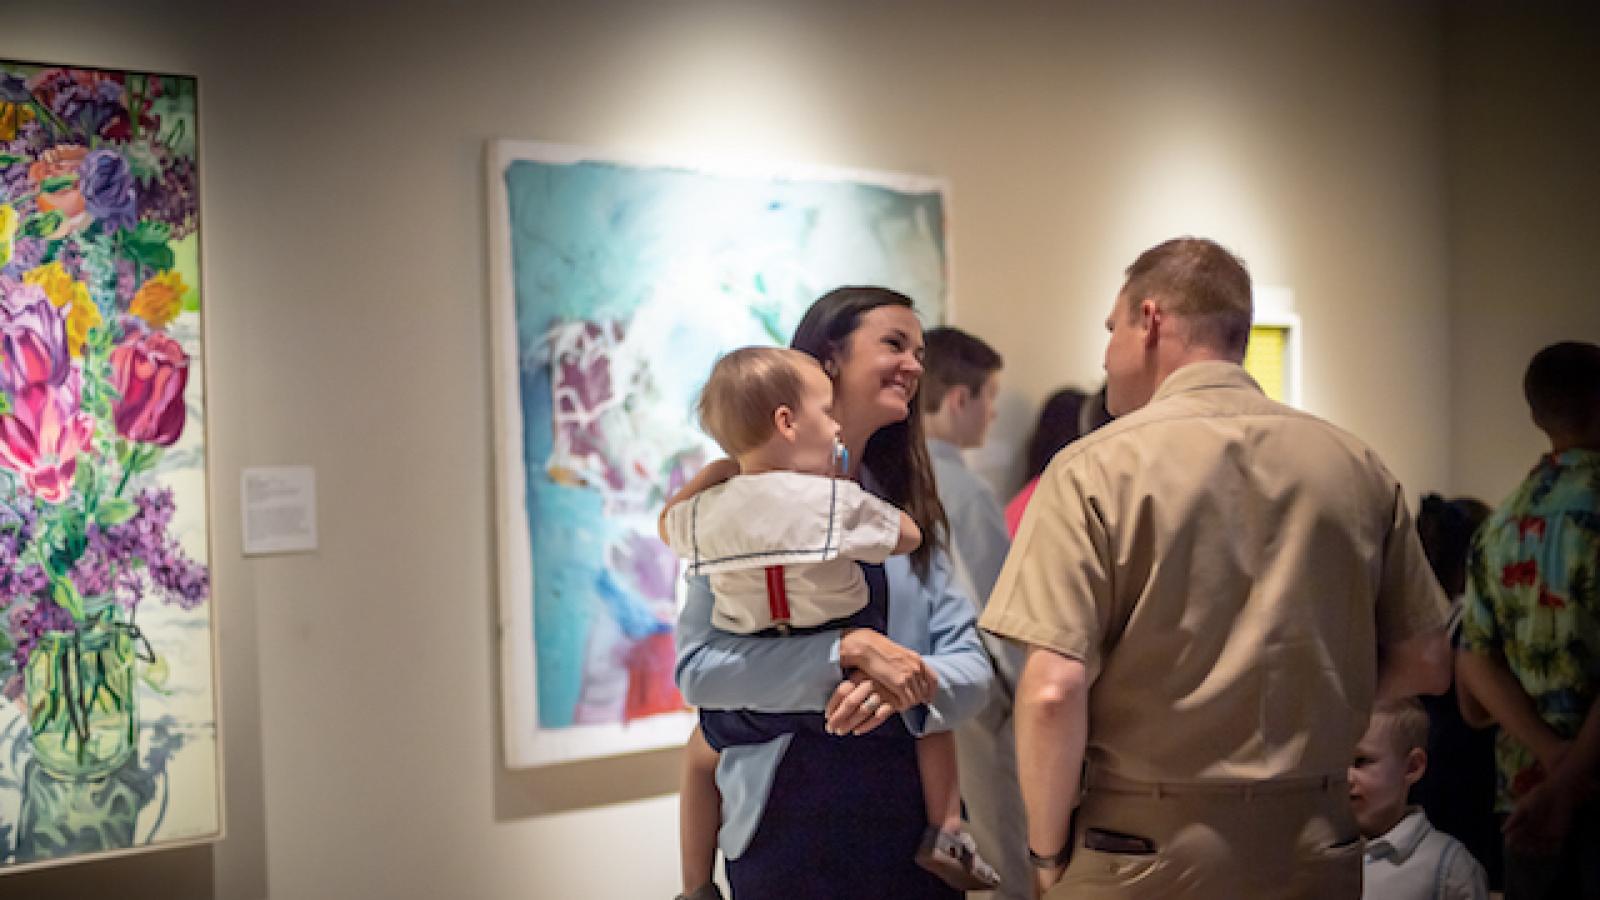 a  man and a woman holding a child talk to each other against a background of colorful paintings